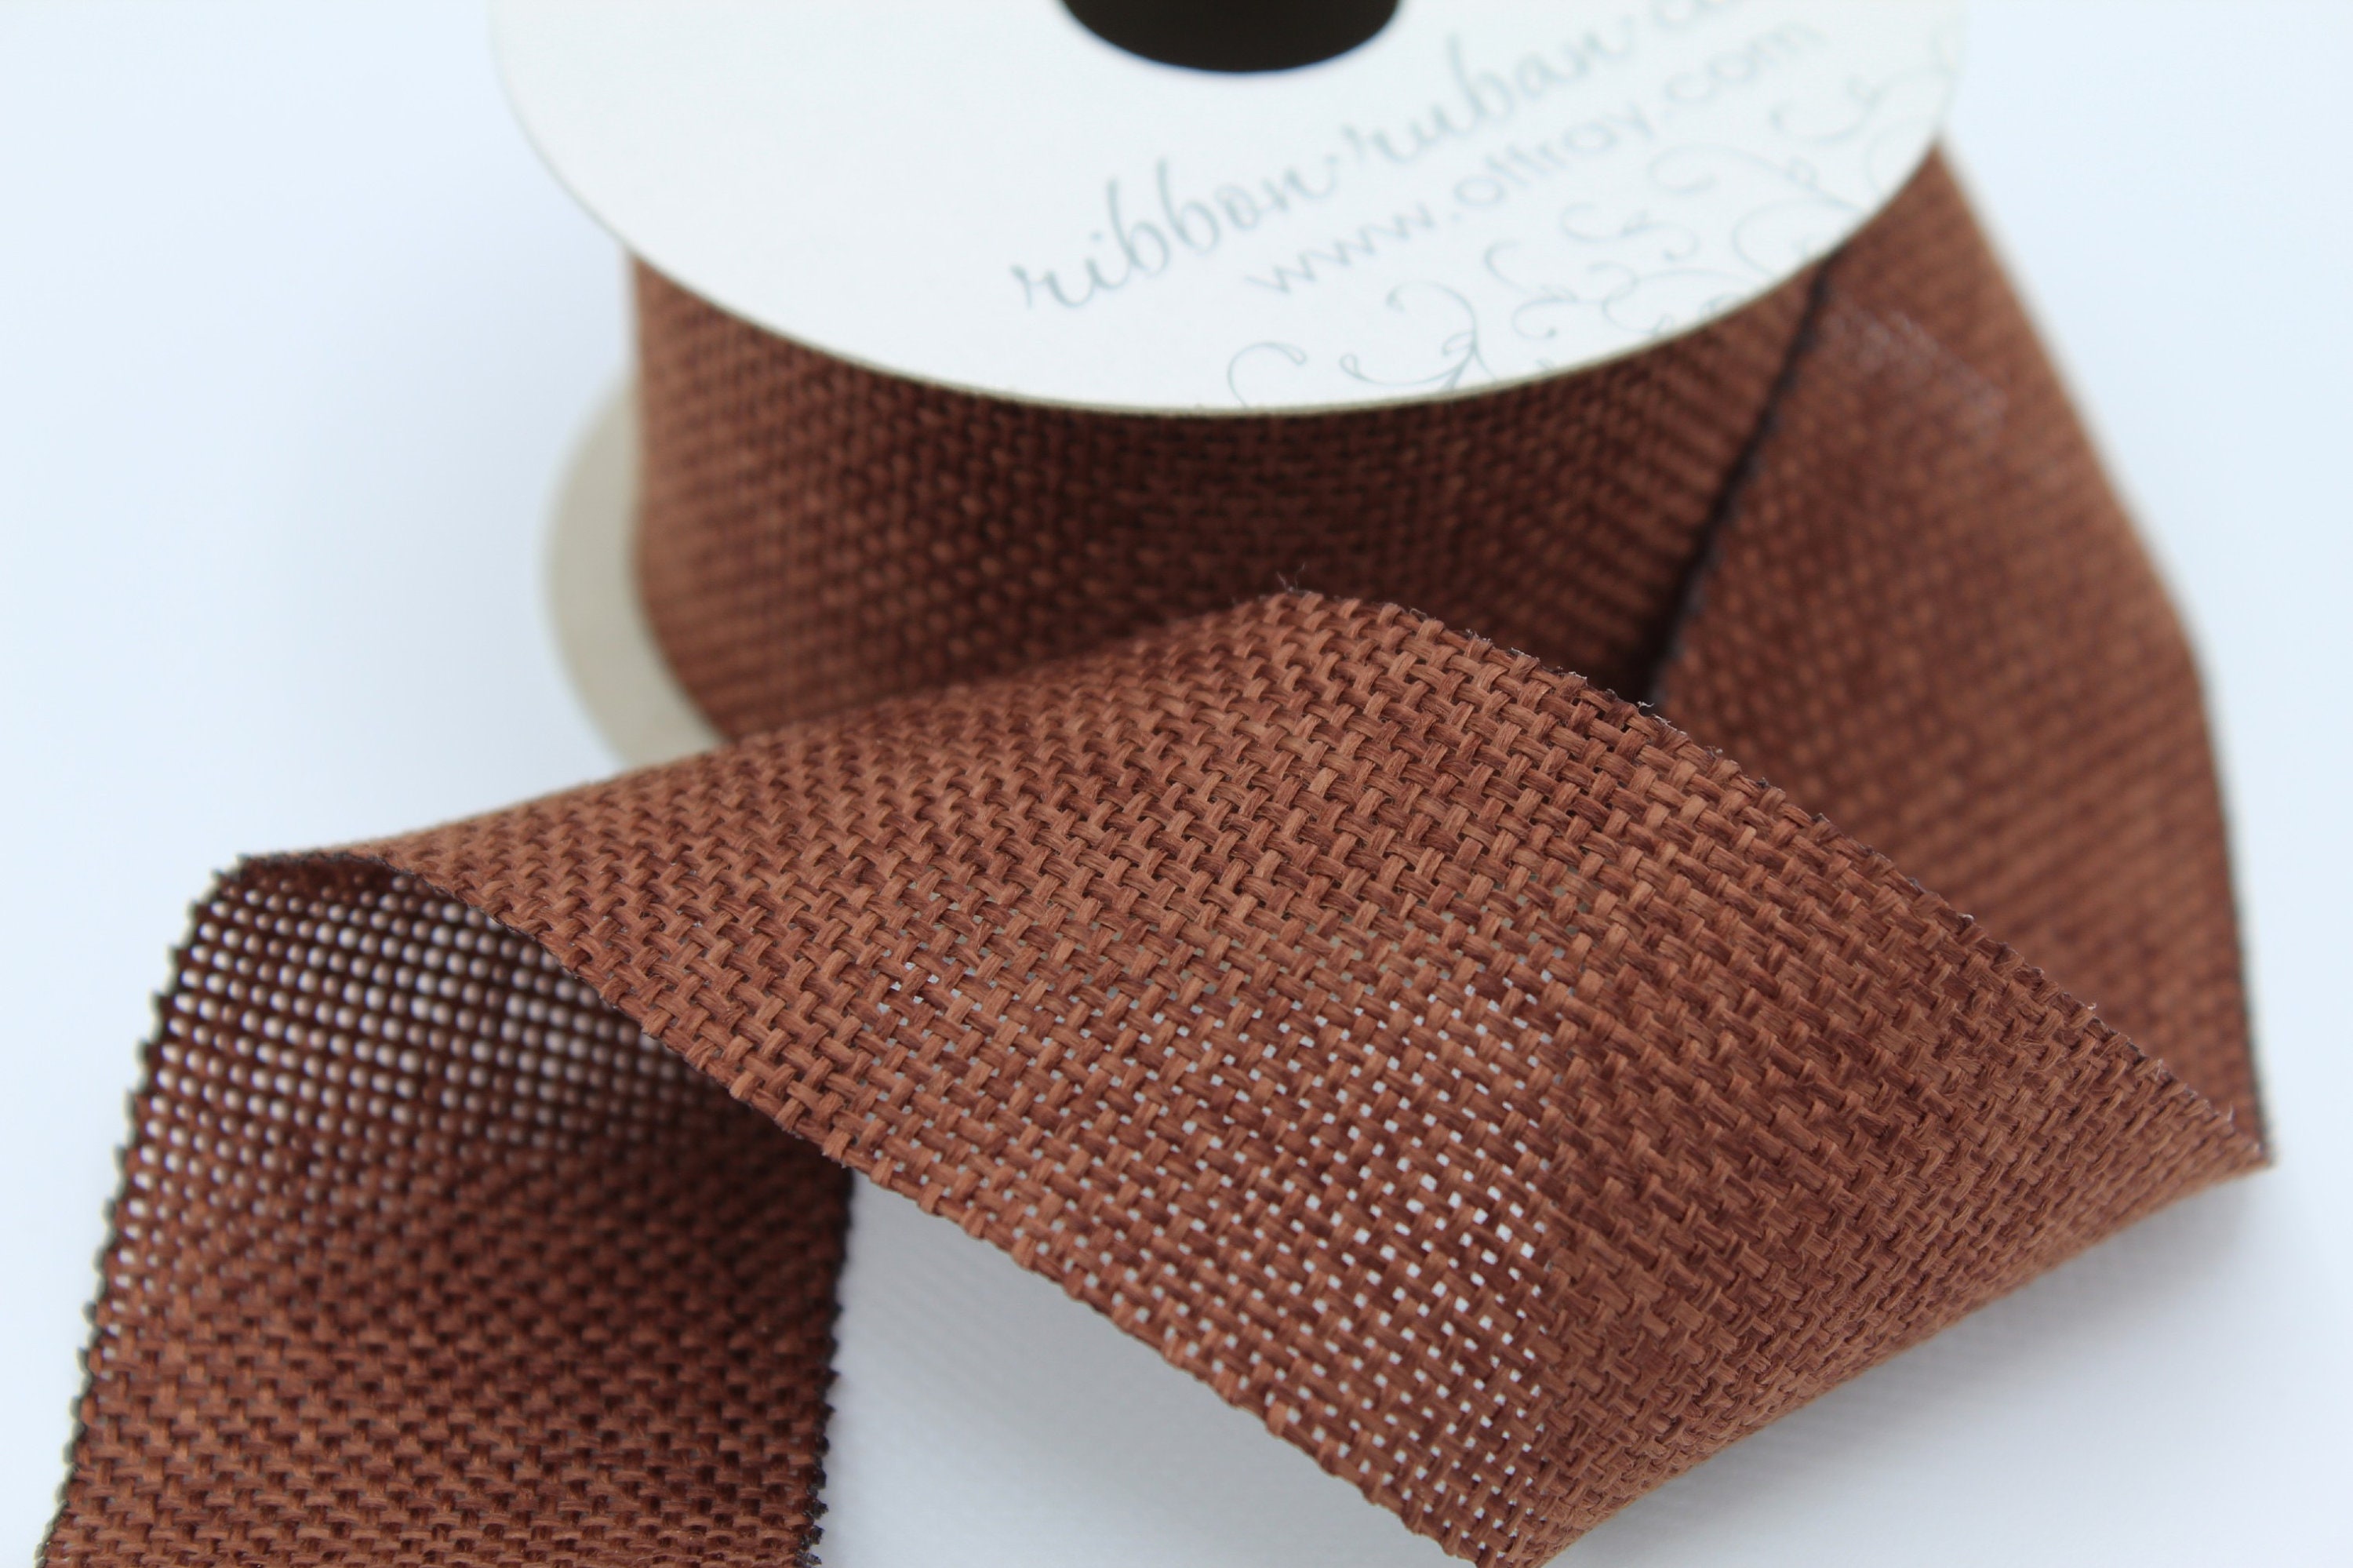  MEEDEE Dark Red Burlap Ribbon Natural Jute Burlap Ribbon  Burgundy Burlap Ribbon 1.5 Inch Jute Ribbon for Gift Wrapping Fabric Ribbon  Craft Ribbon for Burlap Bow Rustic Home Party Decor, 10